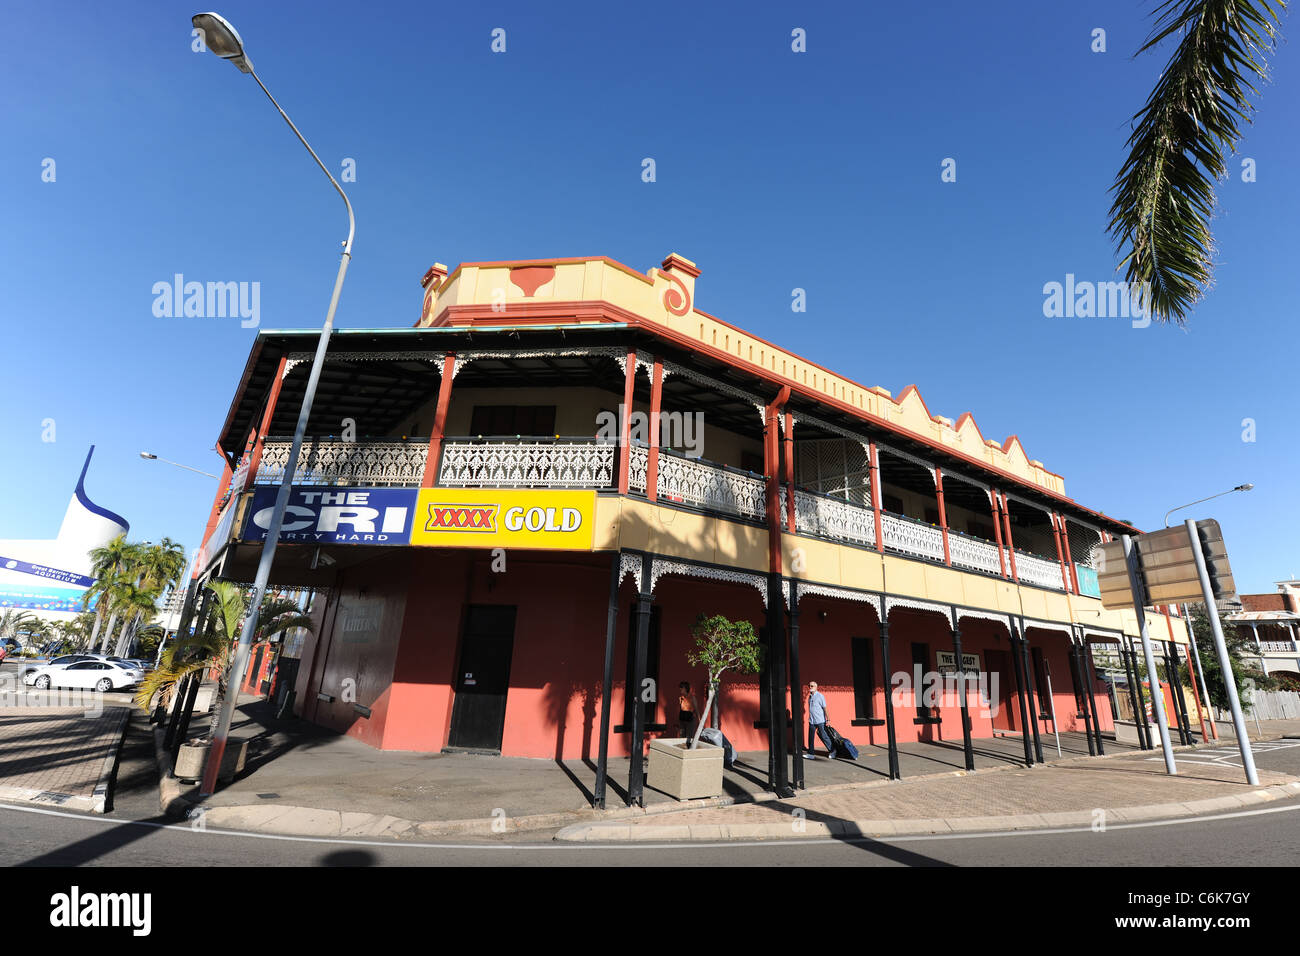 tourists with suitcases walking past The Criterion Hotel (The Cri), on The Strand, Townsville, Queensland, Australia Stock Photo